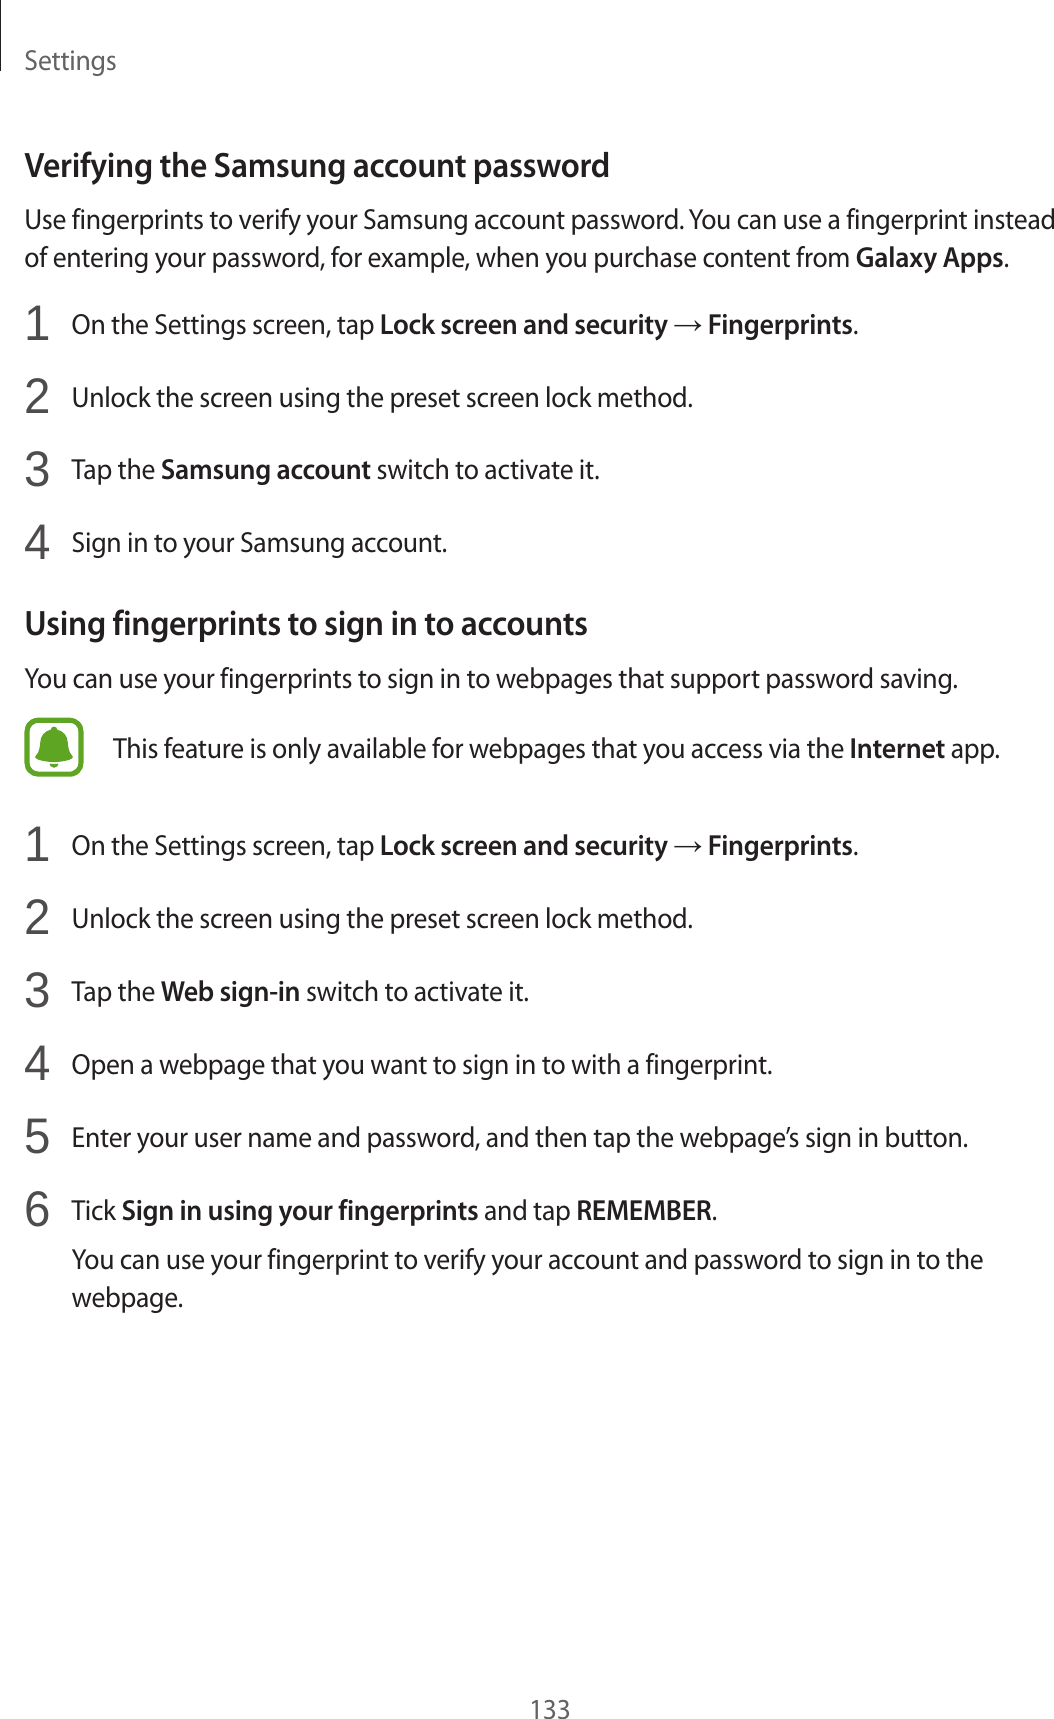 Settings133Verifying the Samsung account passwordUse fingerprints to verify your Samsung account password. You can use a fingerprint instead of entering your password, for example, when you purchase content from Galaxy Apps.1  On the Settings screen, tap Lock screen and security → Fingerprints.2  Unlock the screen using the preset screen lock method.3  Tap the Samsung account switch to activate it.4  Sign in to your Samsung account.Using fingerprints to sign in to accountsYou can use your fingerprints to sign in to webpages that support password saving.This feature is only available for webpages that you access via the Internet app.1  On the Settings screen, tap Lock screen and security → Fingerprints.2  Unlock the screen using the preset screen lock method.3  Tap the Web sign-in switch to activate it.4  Open a webpage that you want to sign in to with a fingerprint.5  Enter your user name and password, and then tap the webpage’s sign in button.6  Tick Sign in using your fingerprints and tap REMEMBER.You can use your fingerprint to verify your account and password to sign in to the webpage.